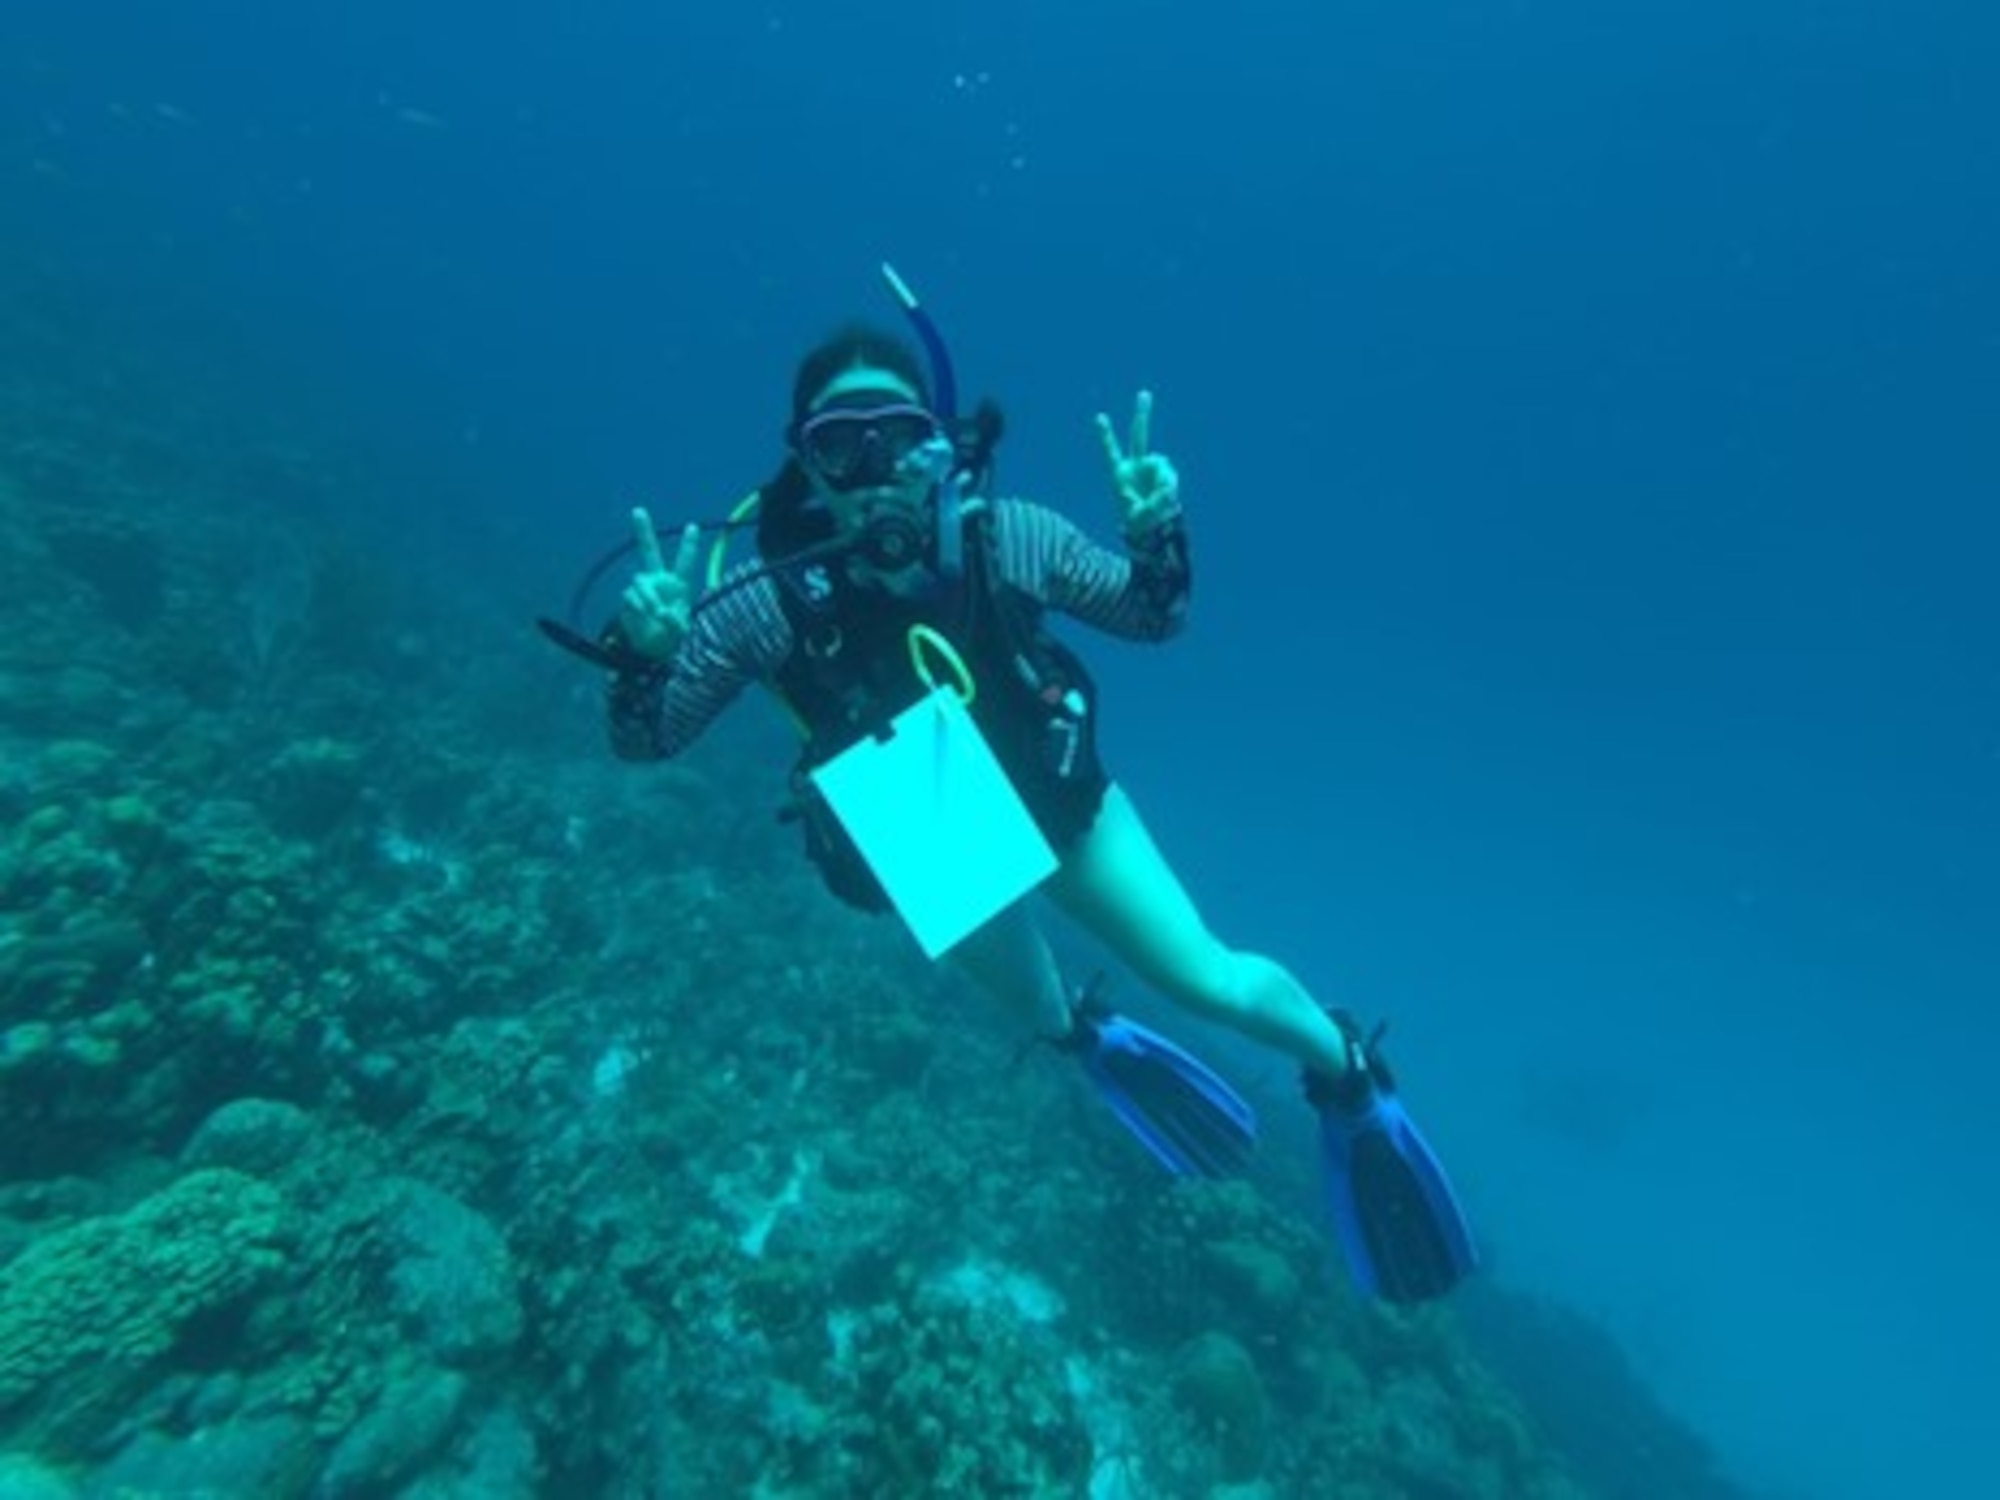 U.S. Air Force Maj. Lindsay Cordero, Air Force Global Strike Command Commander’s Action Group legislative liaison officer, poses for a photo with her sketching slate while scuba diving around the Karpata Reef in Bonaire, Netherlands Antilles, on June 23, 2022. Cordero’s mission is to bring feelings of joy and belonging through her art and writing, which focuses on children’s literacy, conservation, and mental health. (U.S. Air Force courtesy photo)